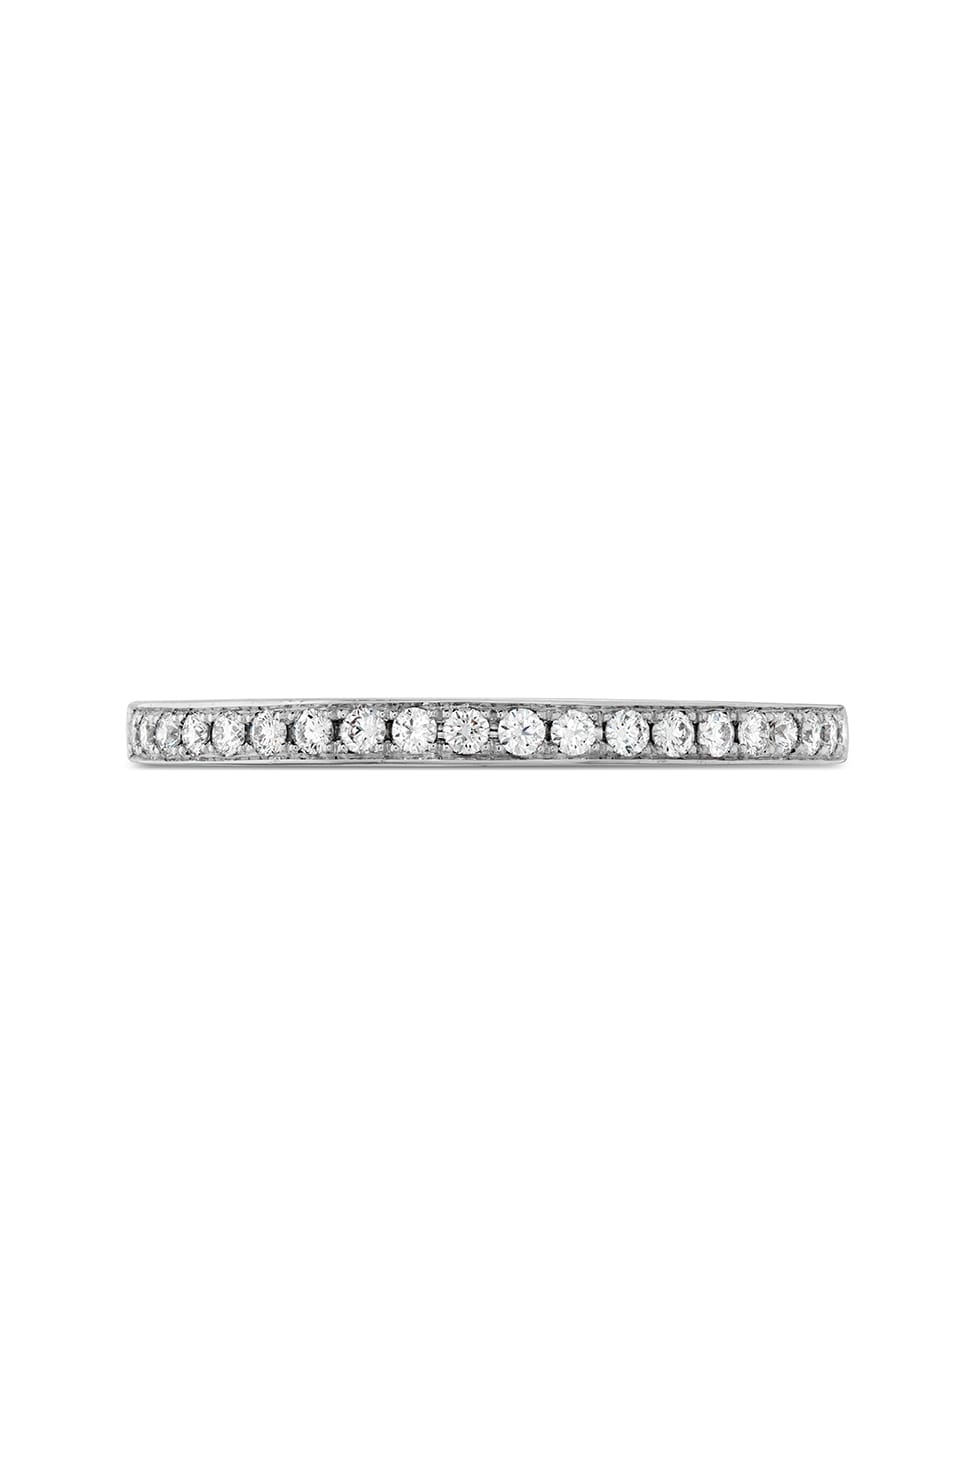 Illustrious Diamond Band From Hearts On Fire available at LeGassick Diamonds and Jewellery Gold Coast, Australia.